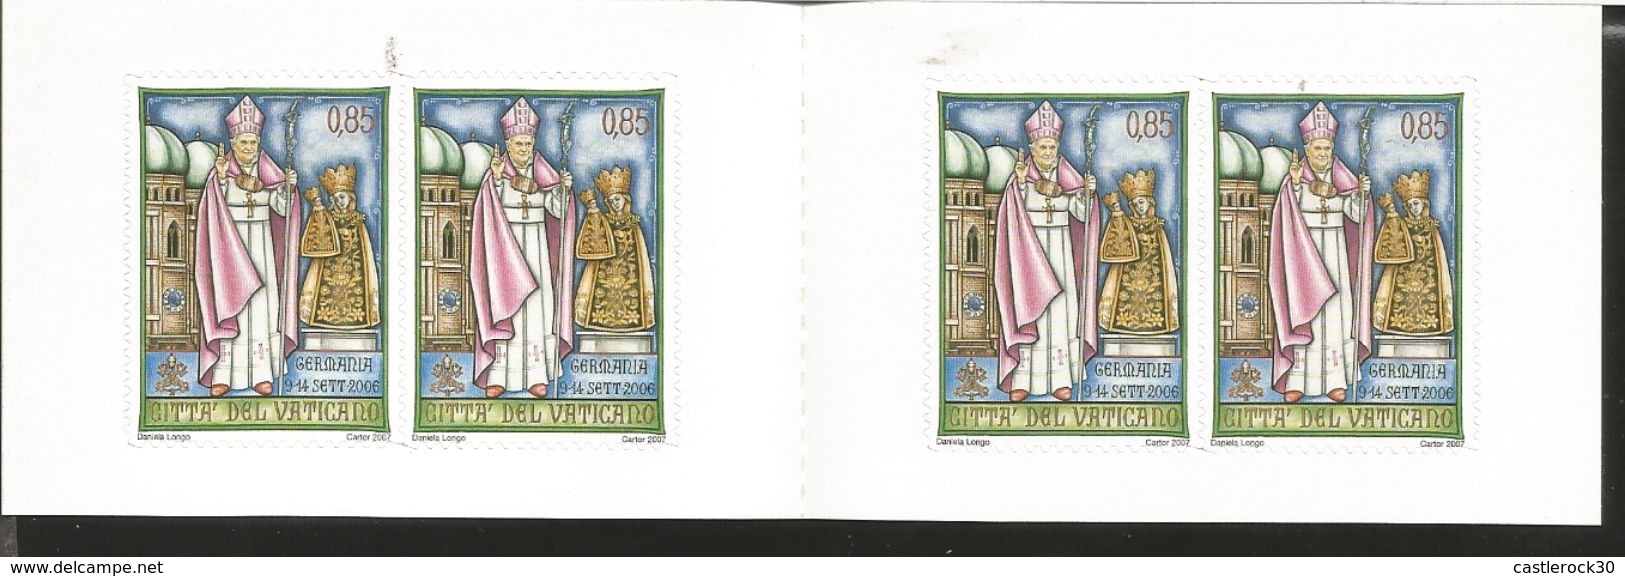 J) 2007 VATICAN CITY, BOOKLET, THE JOURNEYS OF THE HOLY FATHER IN THE WORLD, ADHESIVE STICKER, XF - Brieven En Documenten